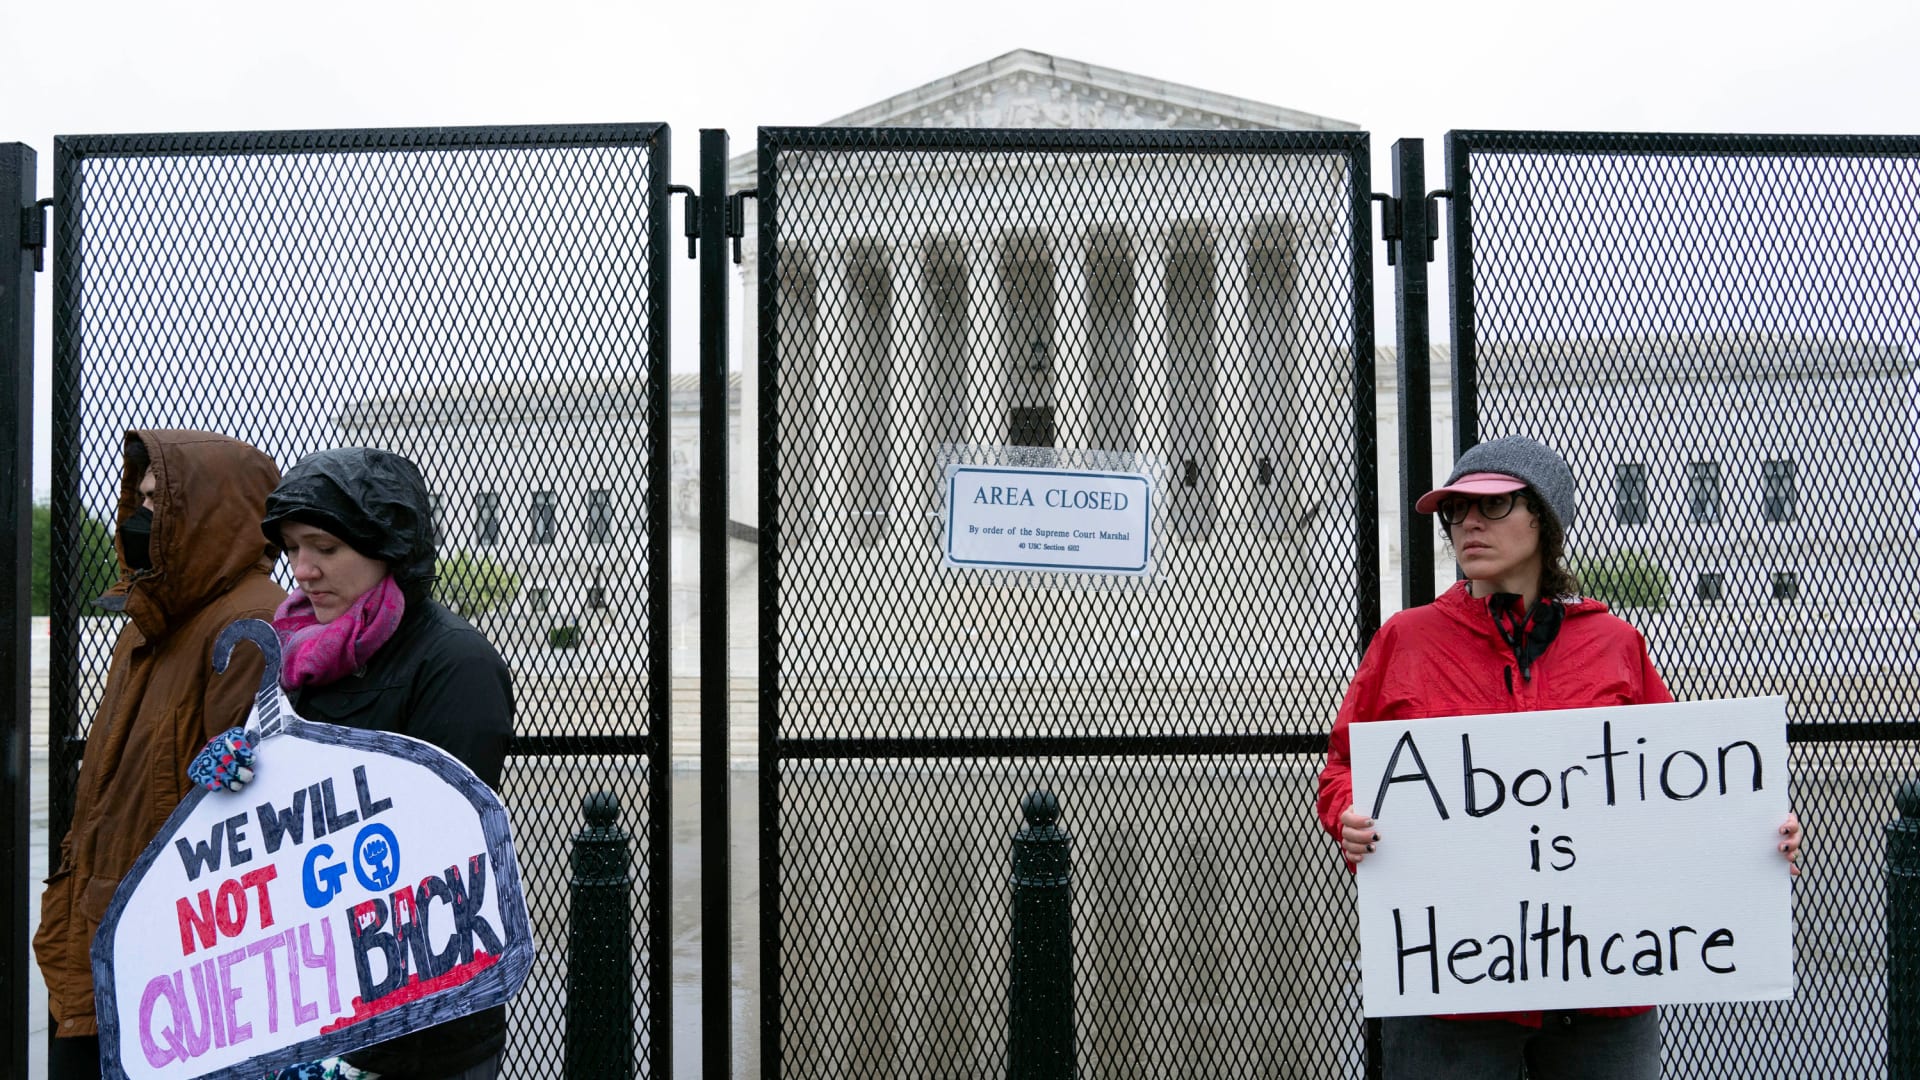 Demonstrators rally for abortion rights in front of the U.S. Supreme Court.